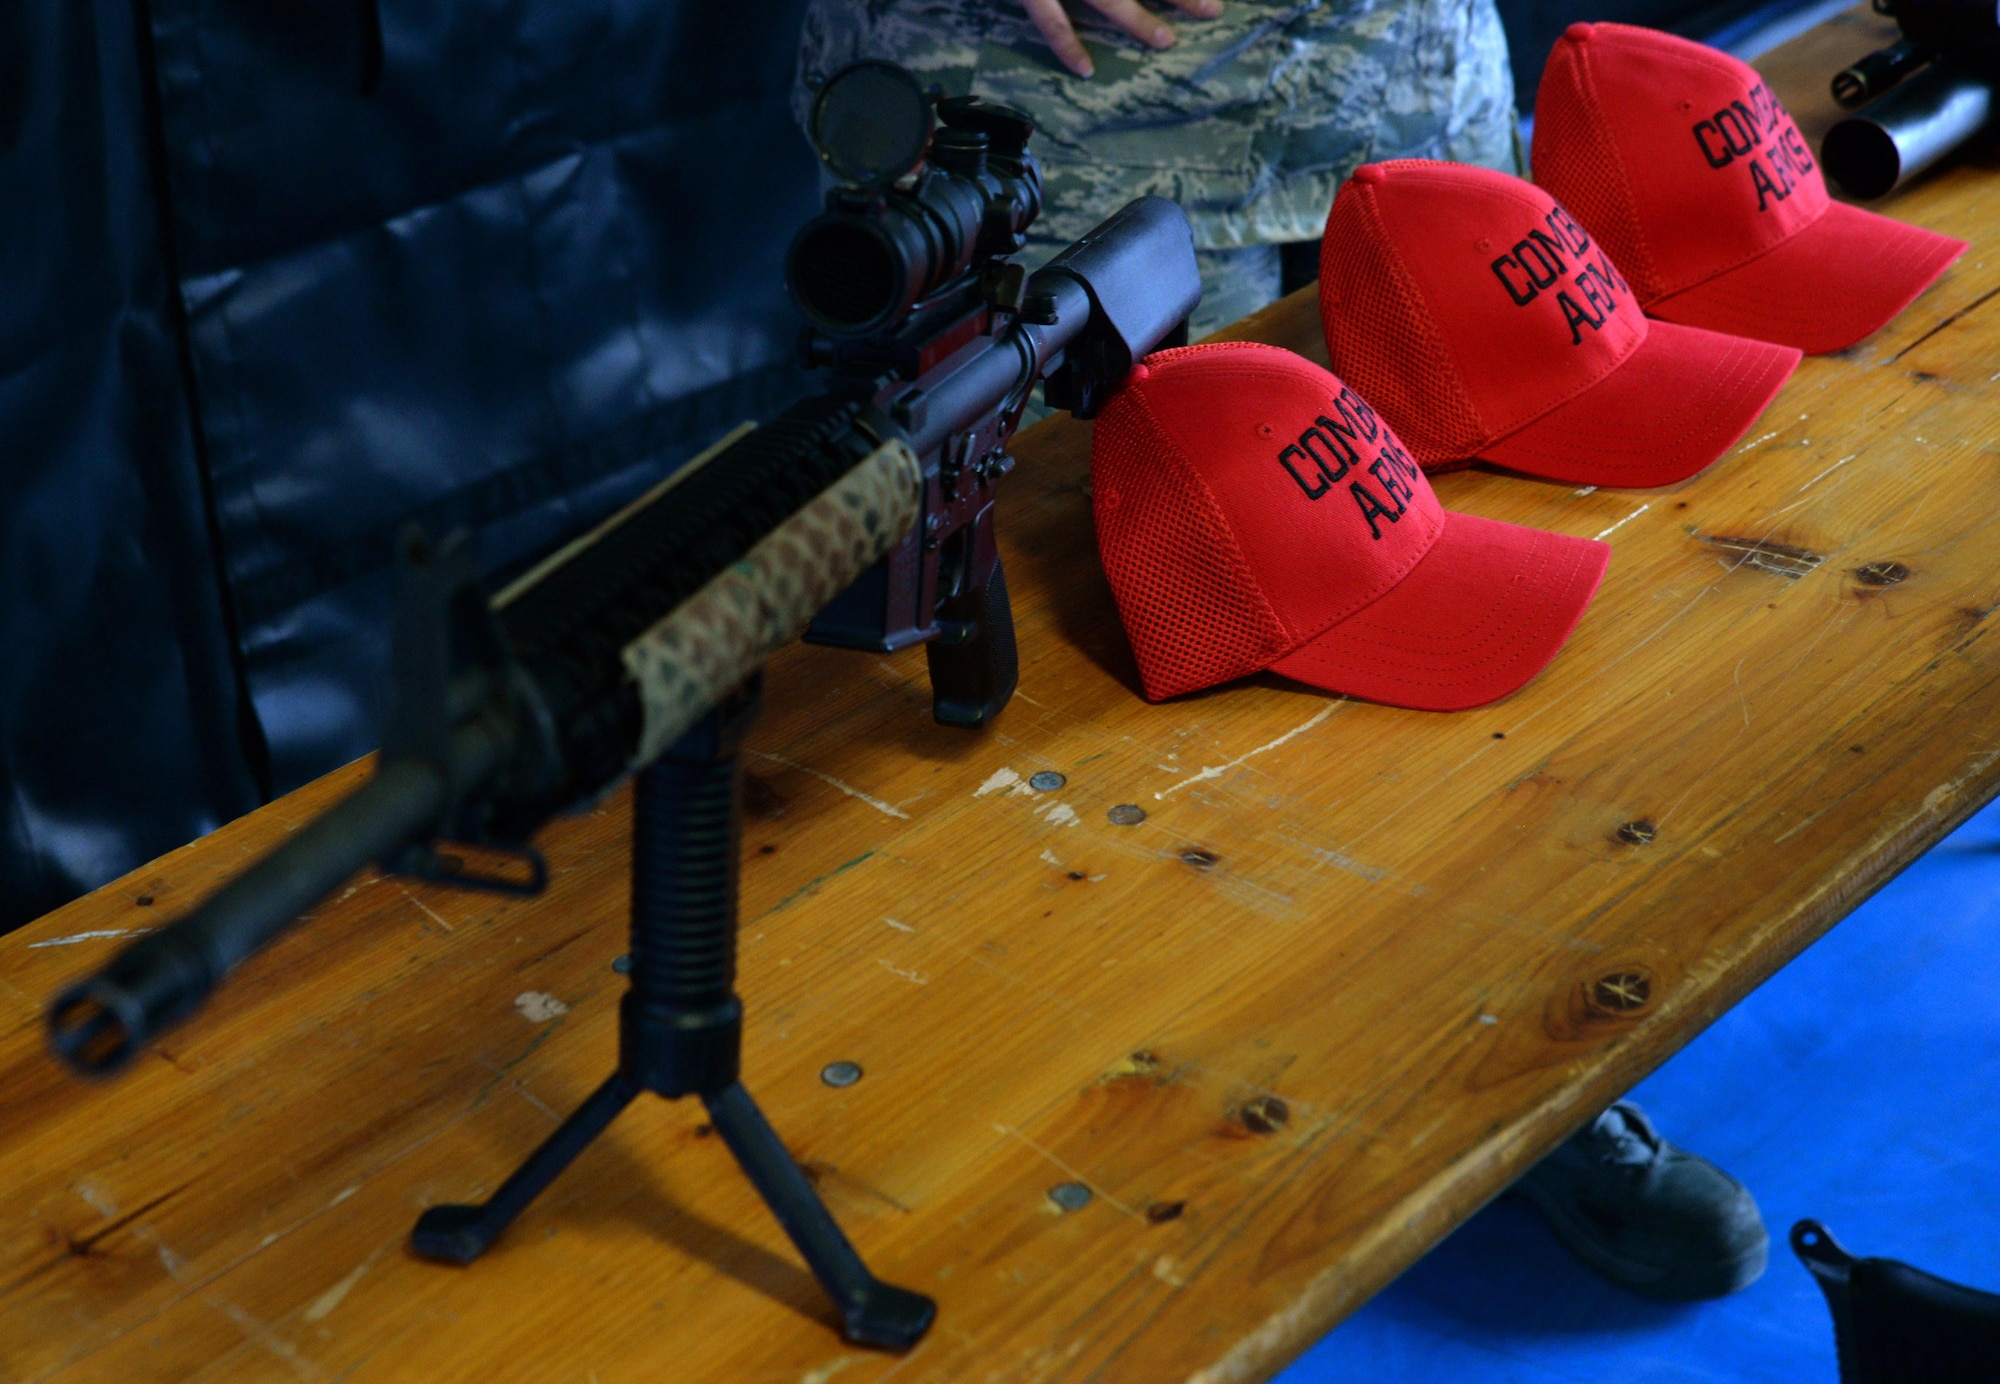 A firearm is displayed on a table at the 569th United States Forces Police Squadron training area on Kapaun Air Station, Germany, Mar. 7, 2017. Combat Arms Training and Maintenance Airmen showcase weaponry for several Carolina Panthers players and cheerleaders during a visit to the 569th USFPS training area. (U.S. Air Force photo by Airman 1st Class D. Blake Browning)